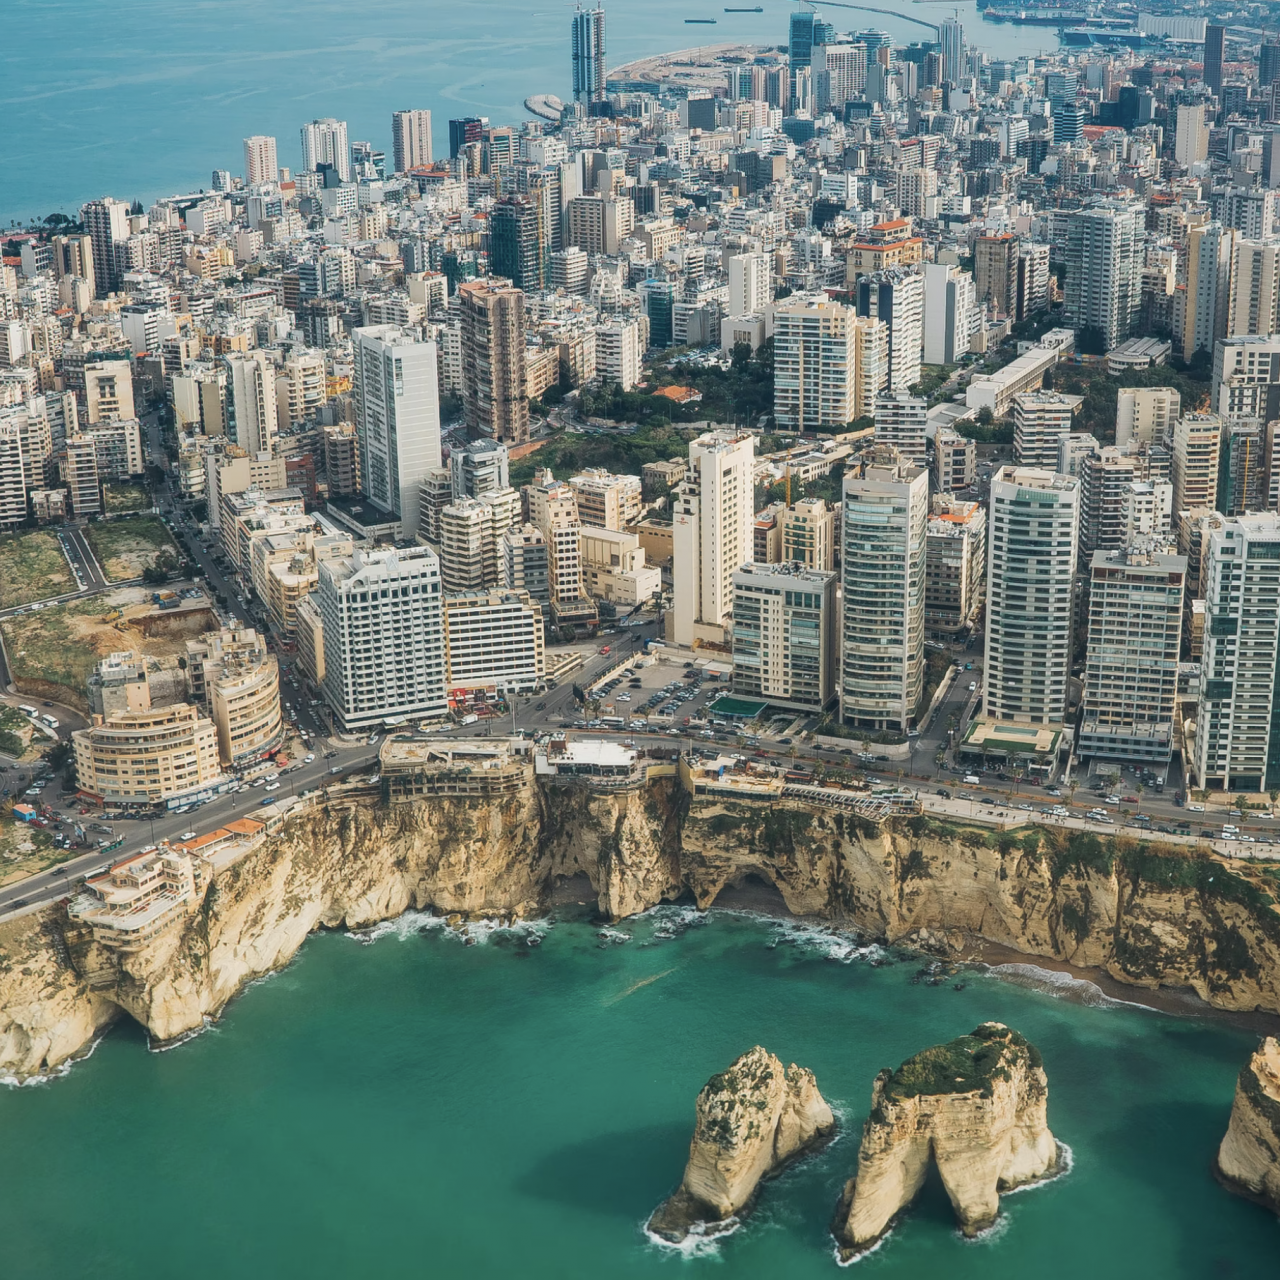 Lebanon : How for two years, the multidimensional crisis in which Lebanon has been plunged has continued to modify its economic, financial and monetary landscape